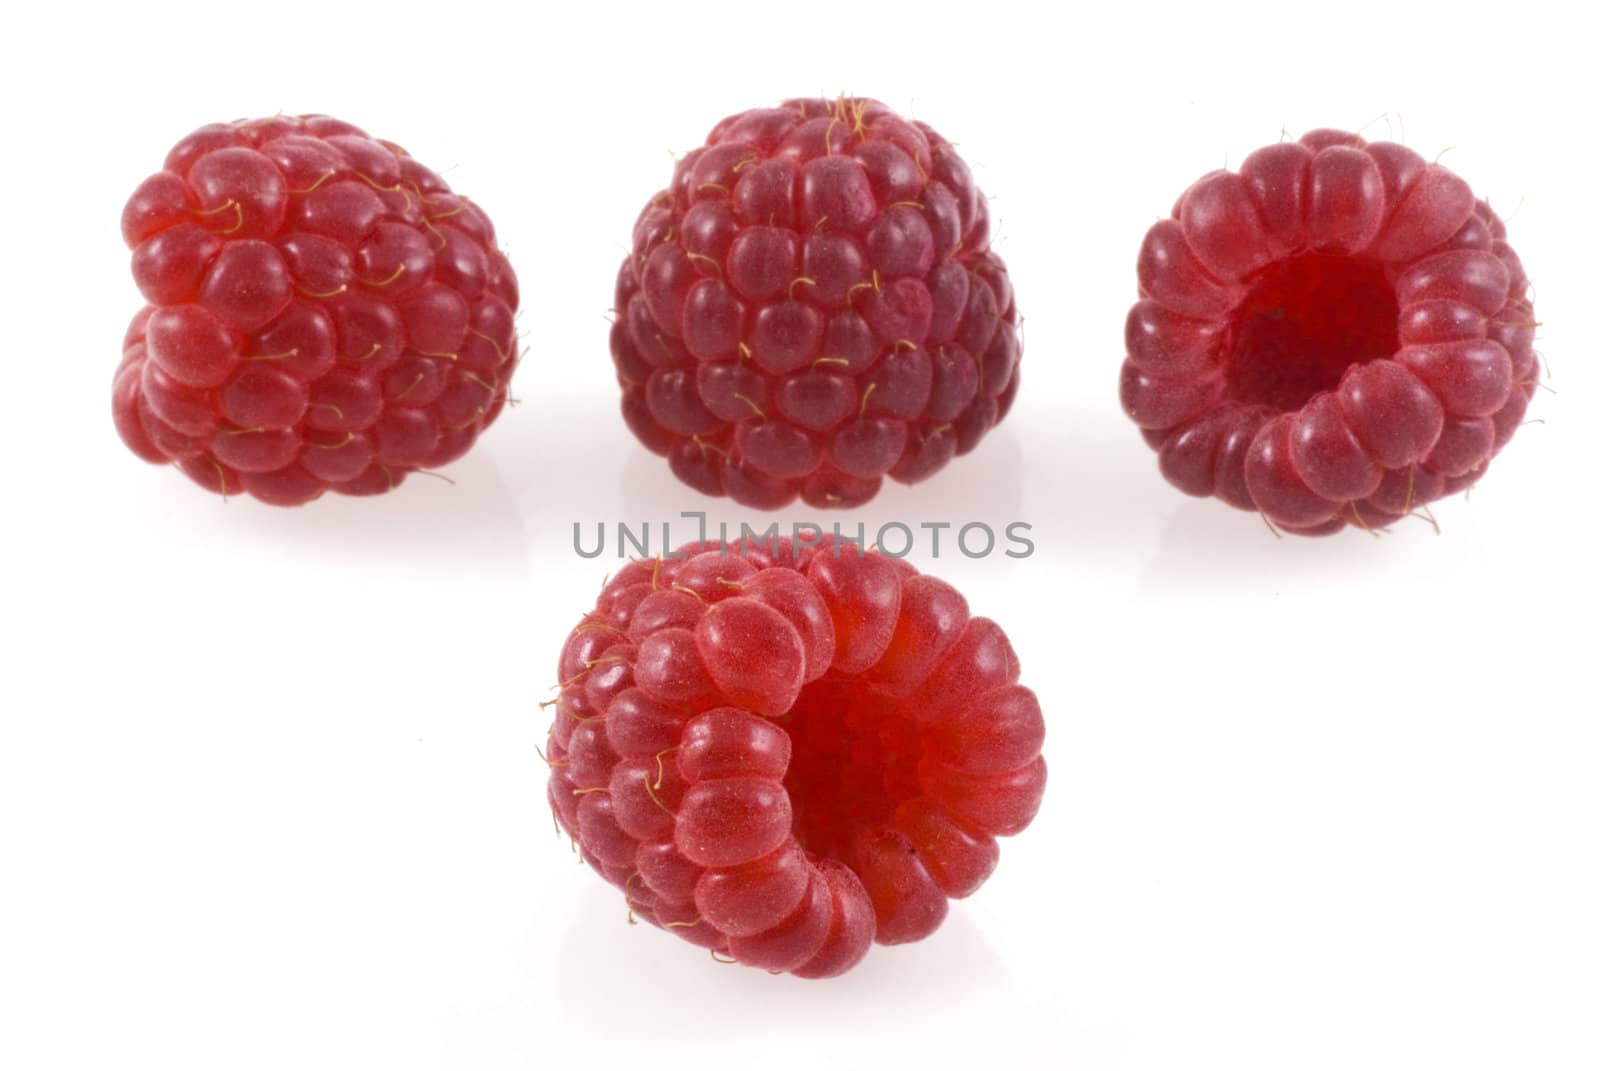 Four raspberries on white, one in the front and four in the back.